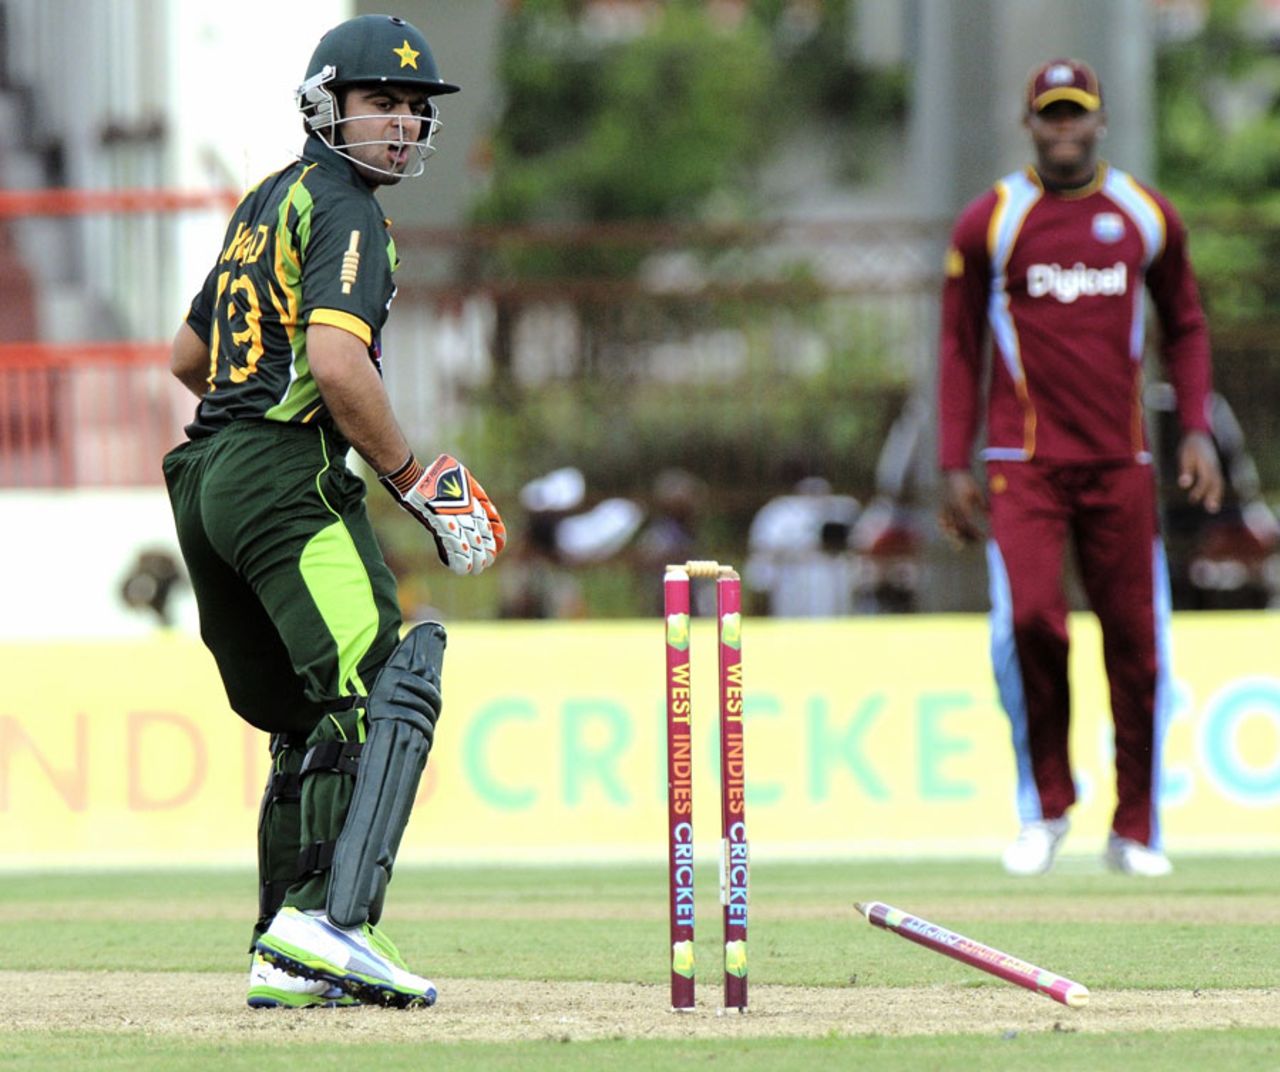 Ahmed Shehzad looks back as his off stump goes for a walk, West Indies v Pakistan, 1st ODI, Providence, July 14, 2013